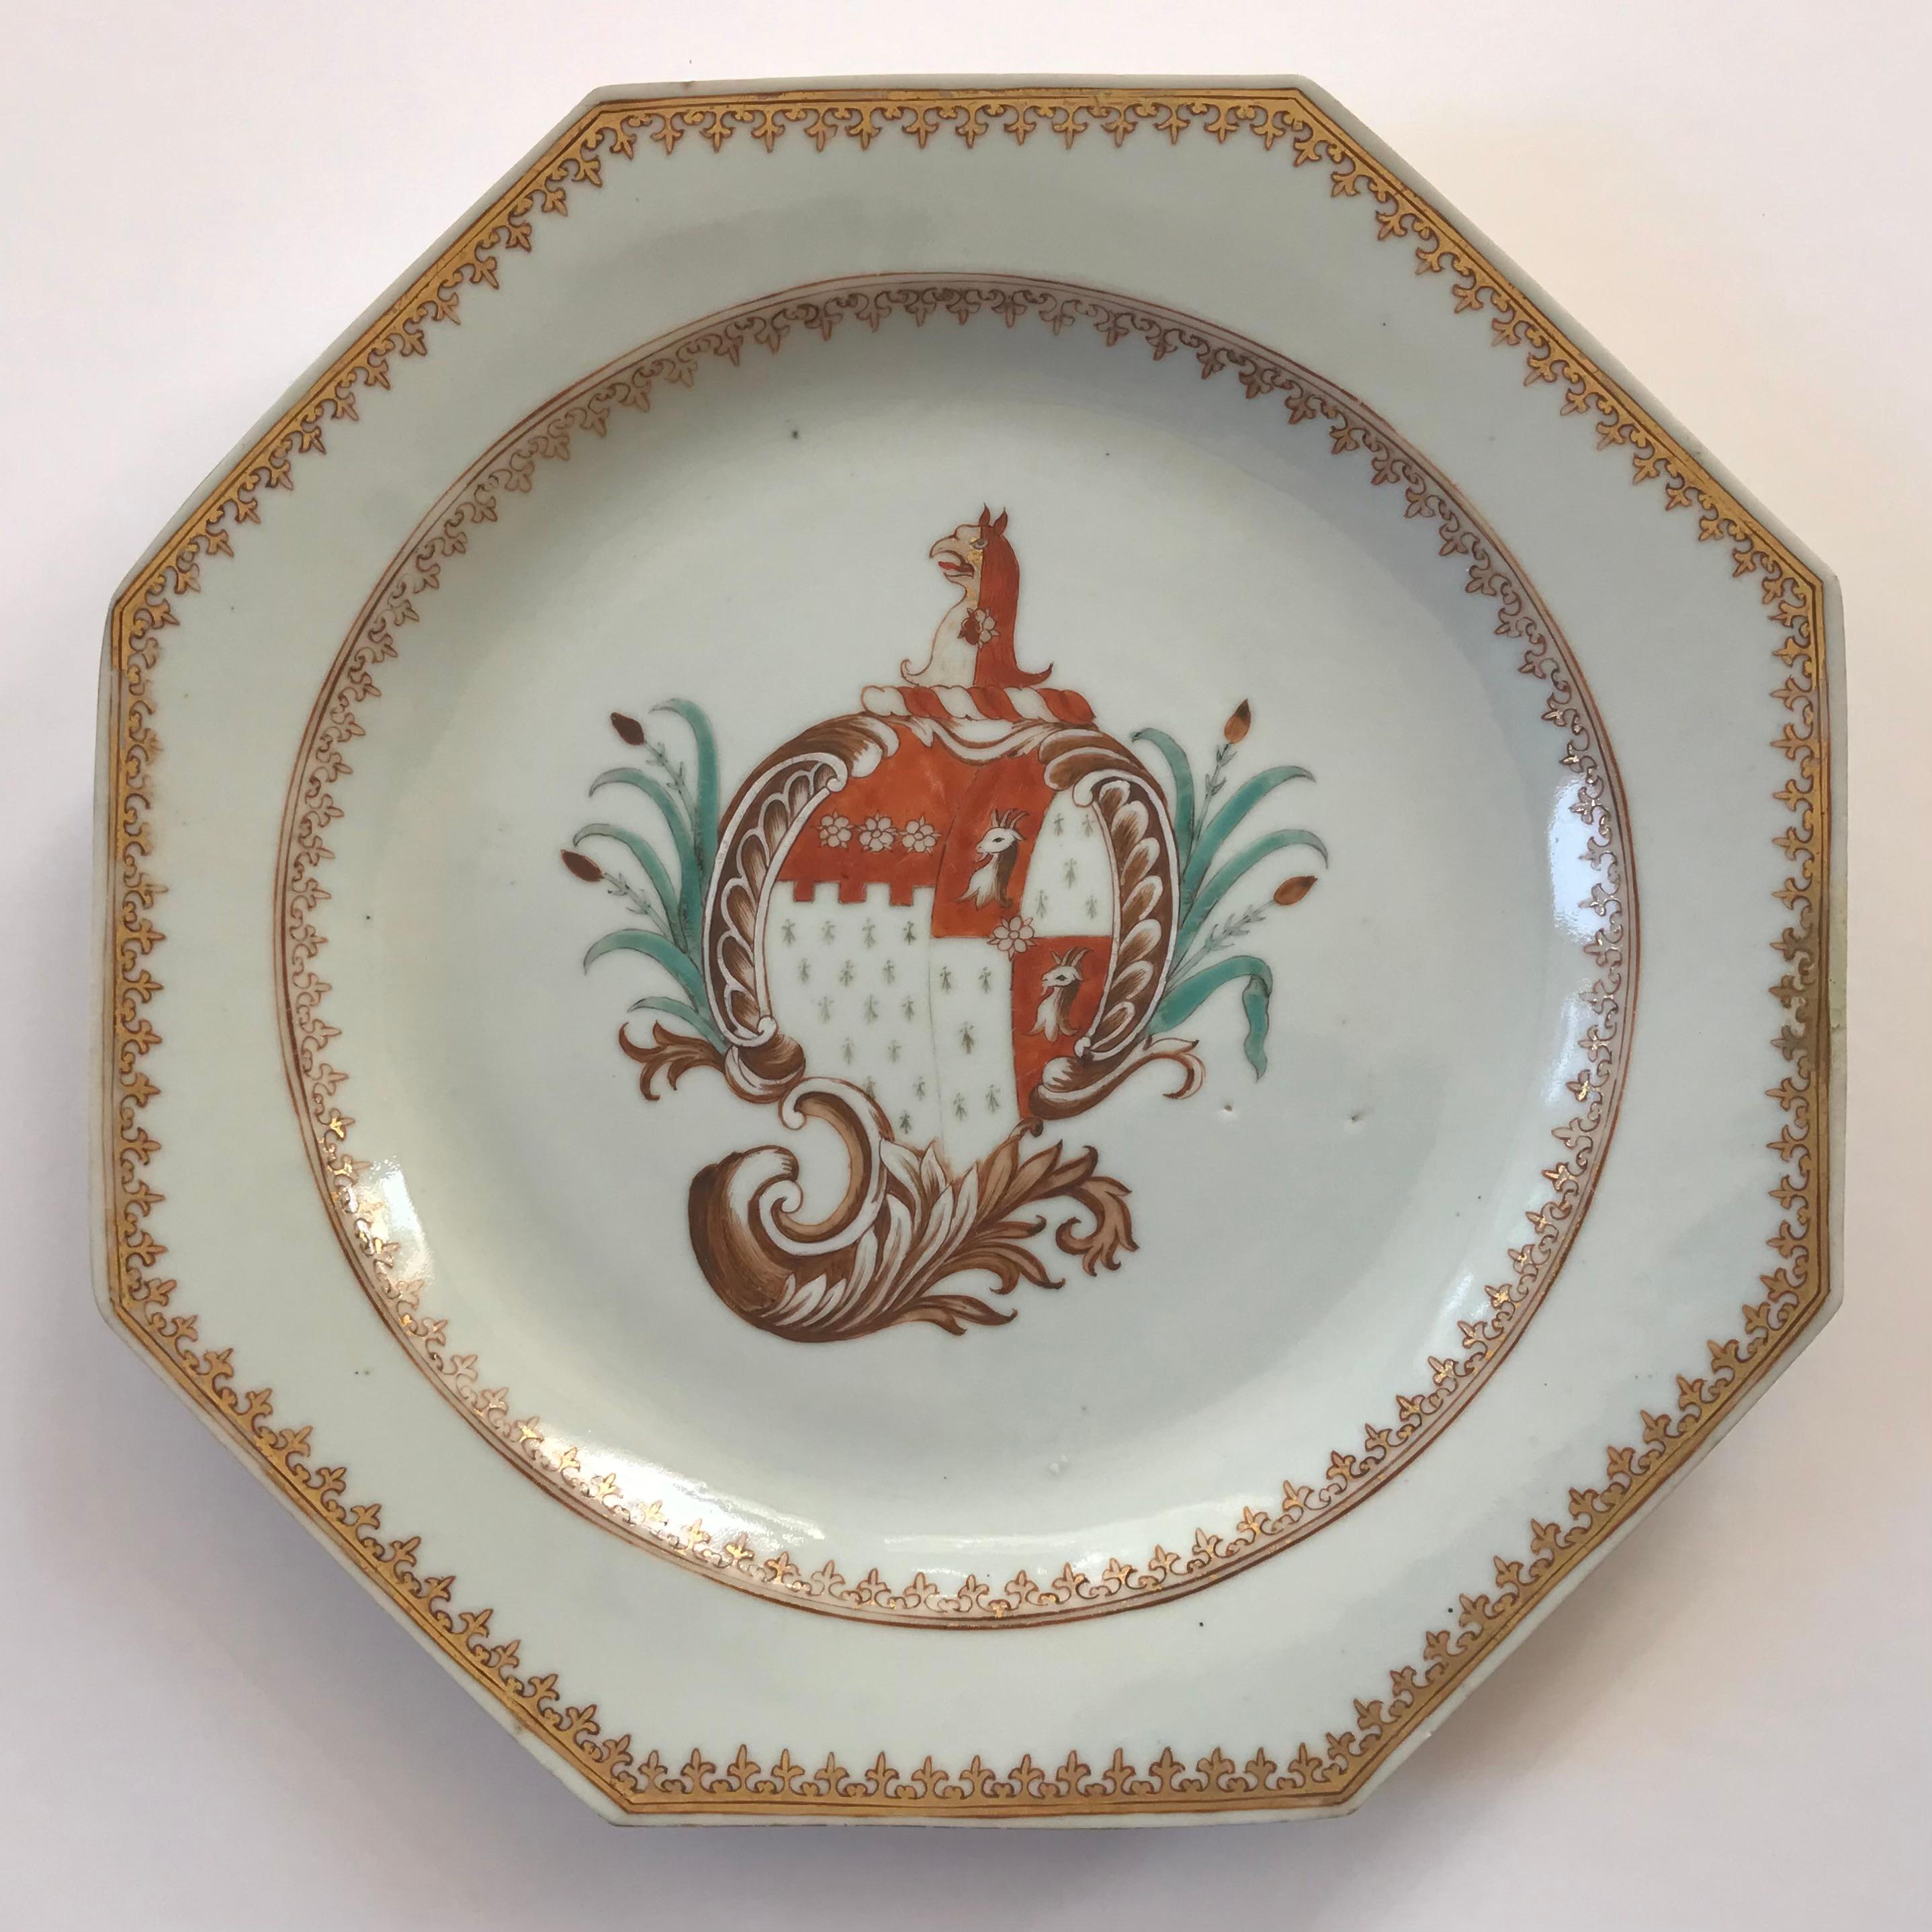 Enameled Chinese Export Porcelain Armorial Hexagonal Plates For Sale